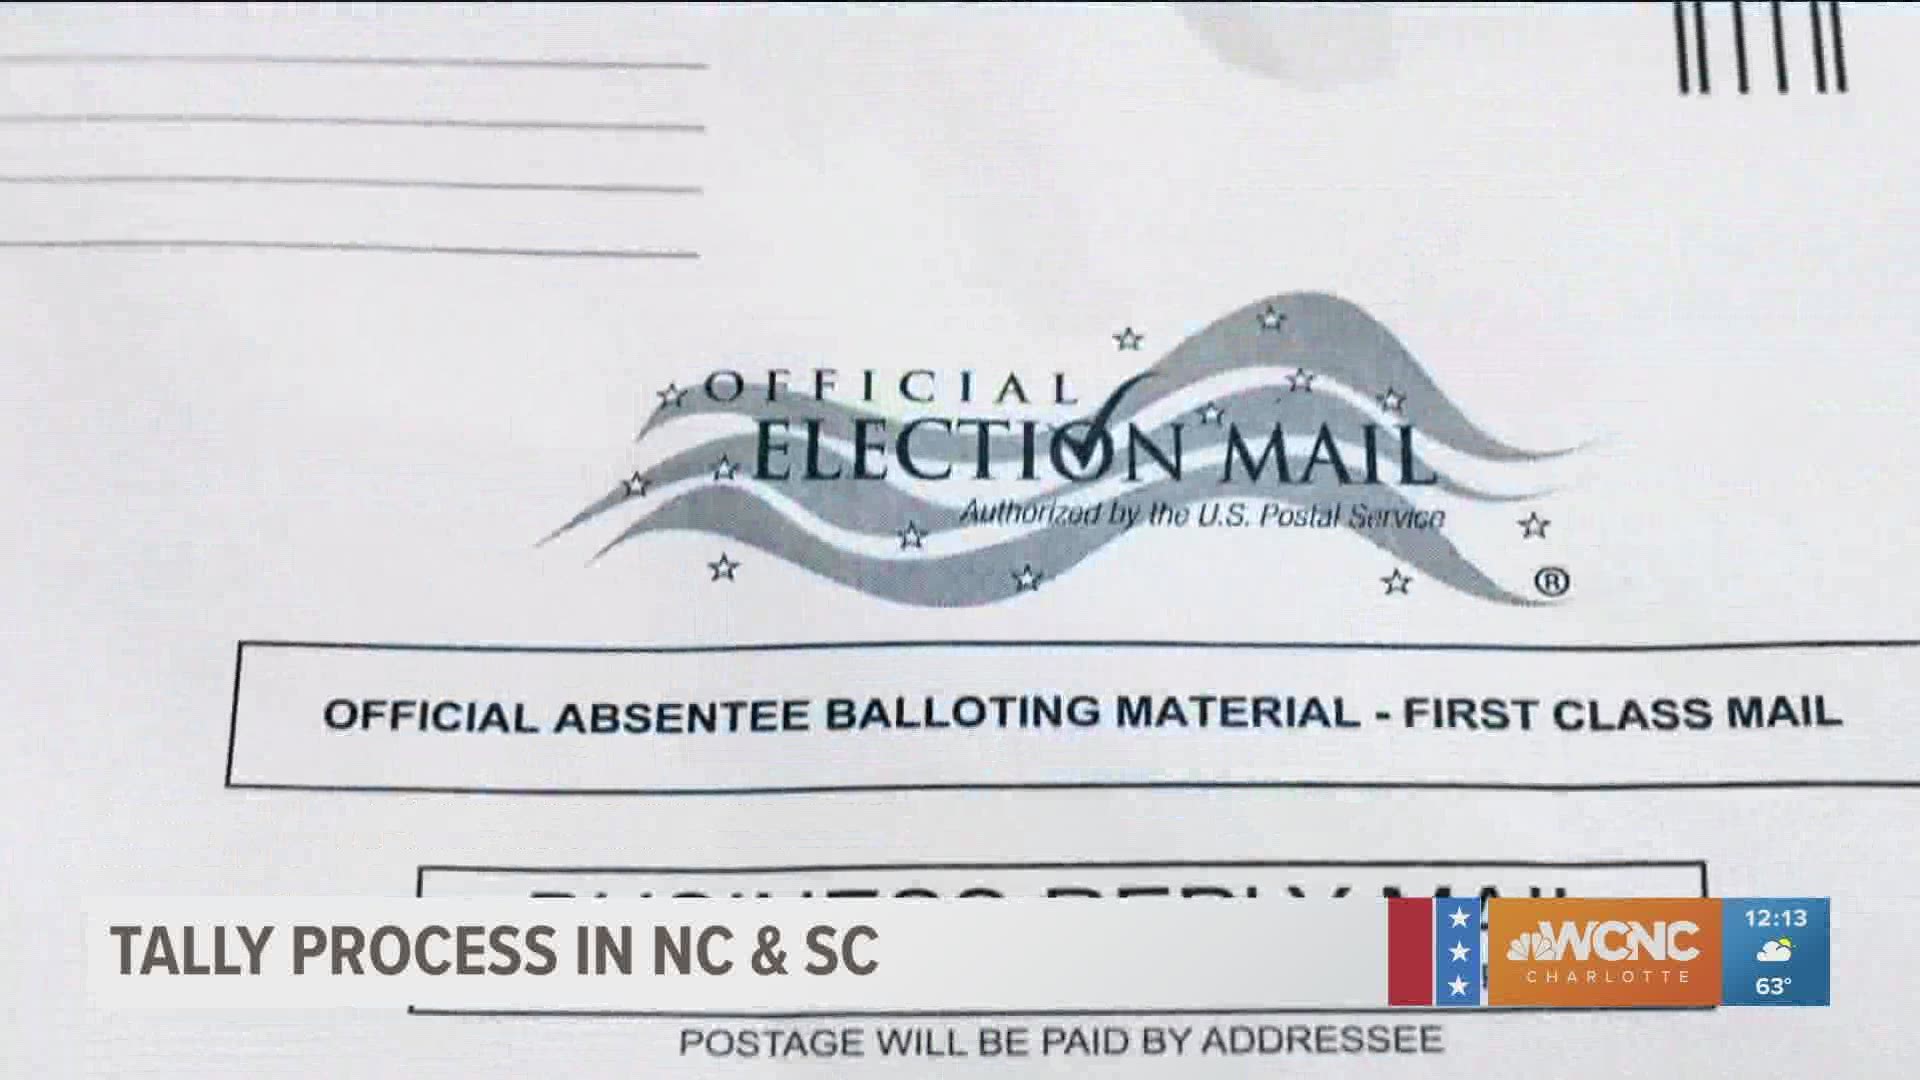 With tens of thousands of absentee ballots in North Carolina, it could be several days before the results of the 2020 election are known.